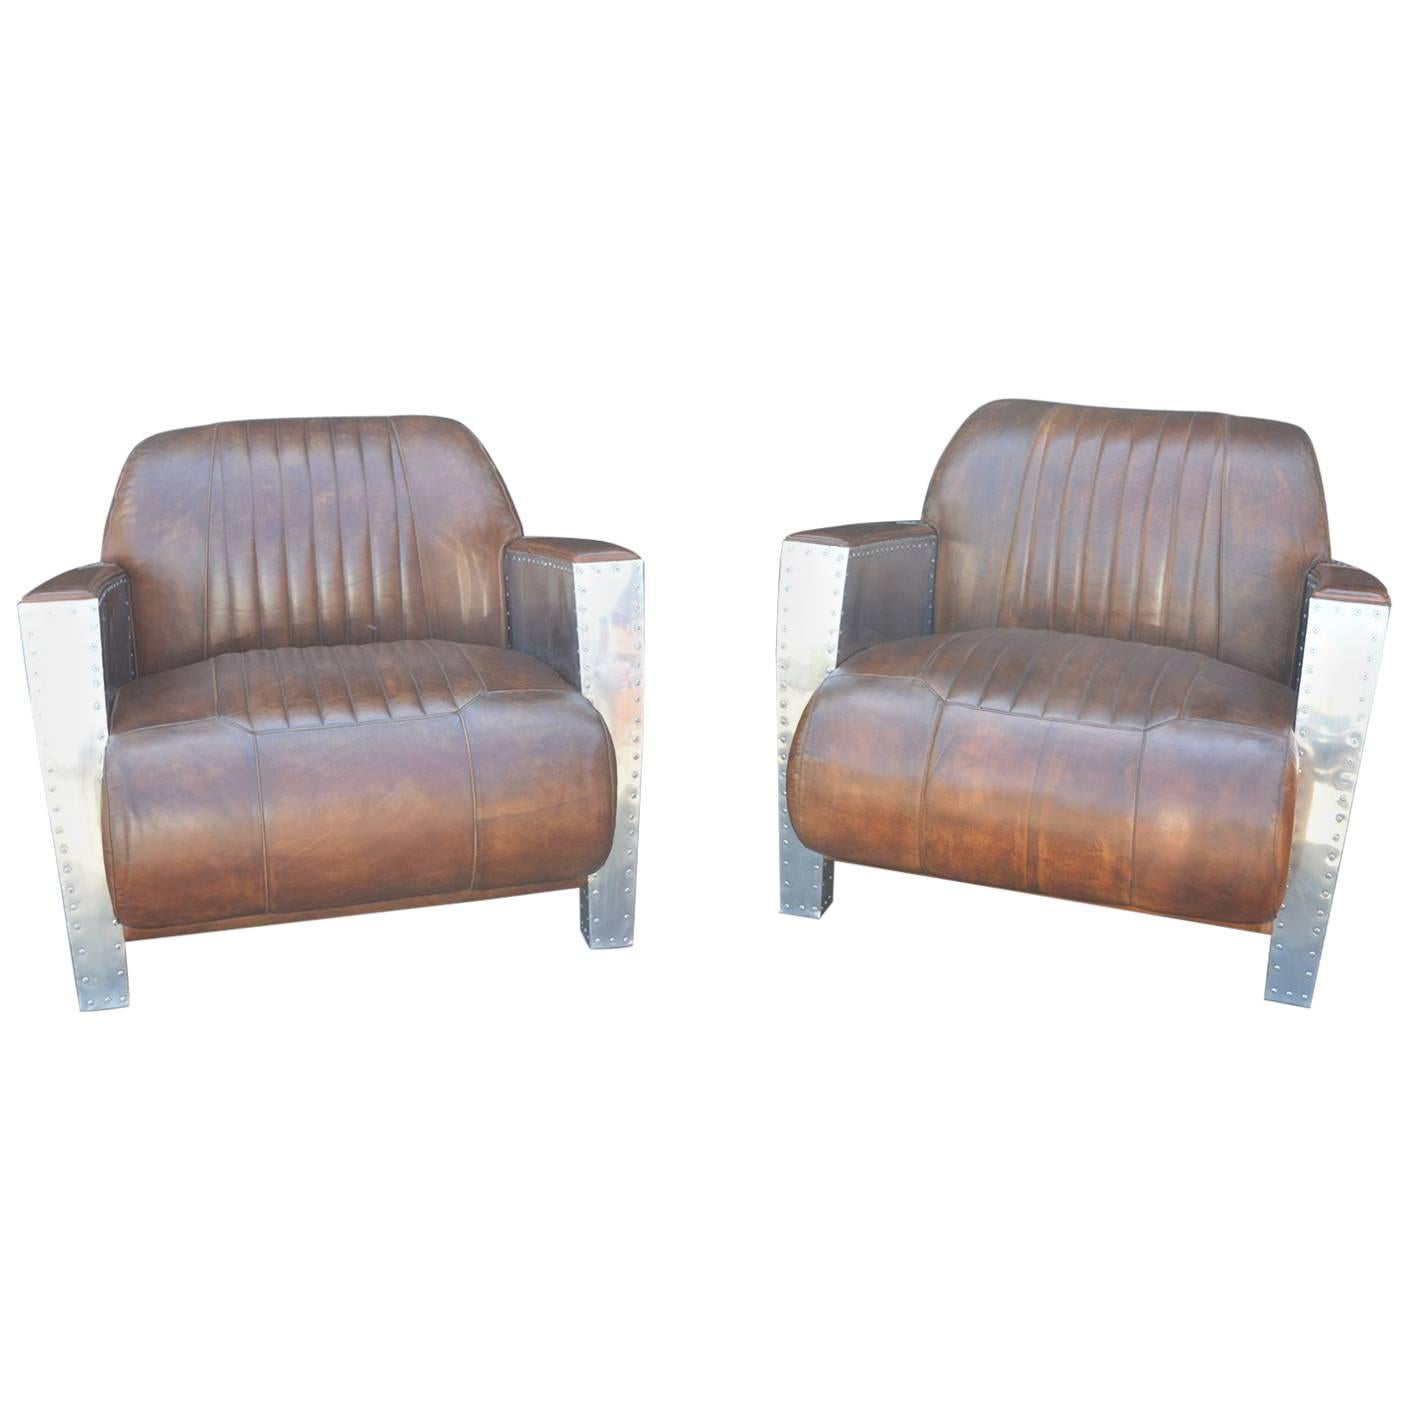 Pair of Riveted Aviator Chairs